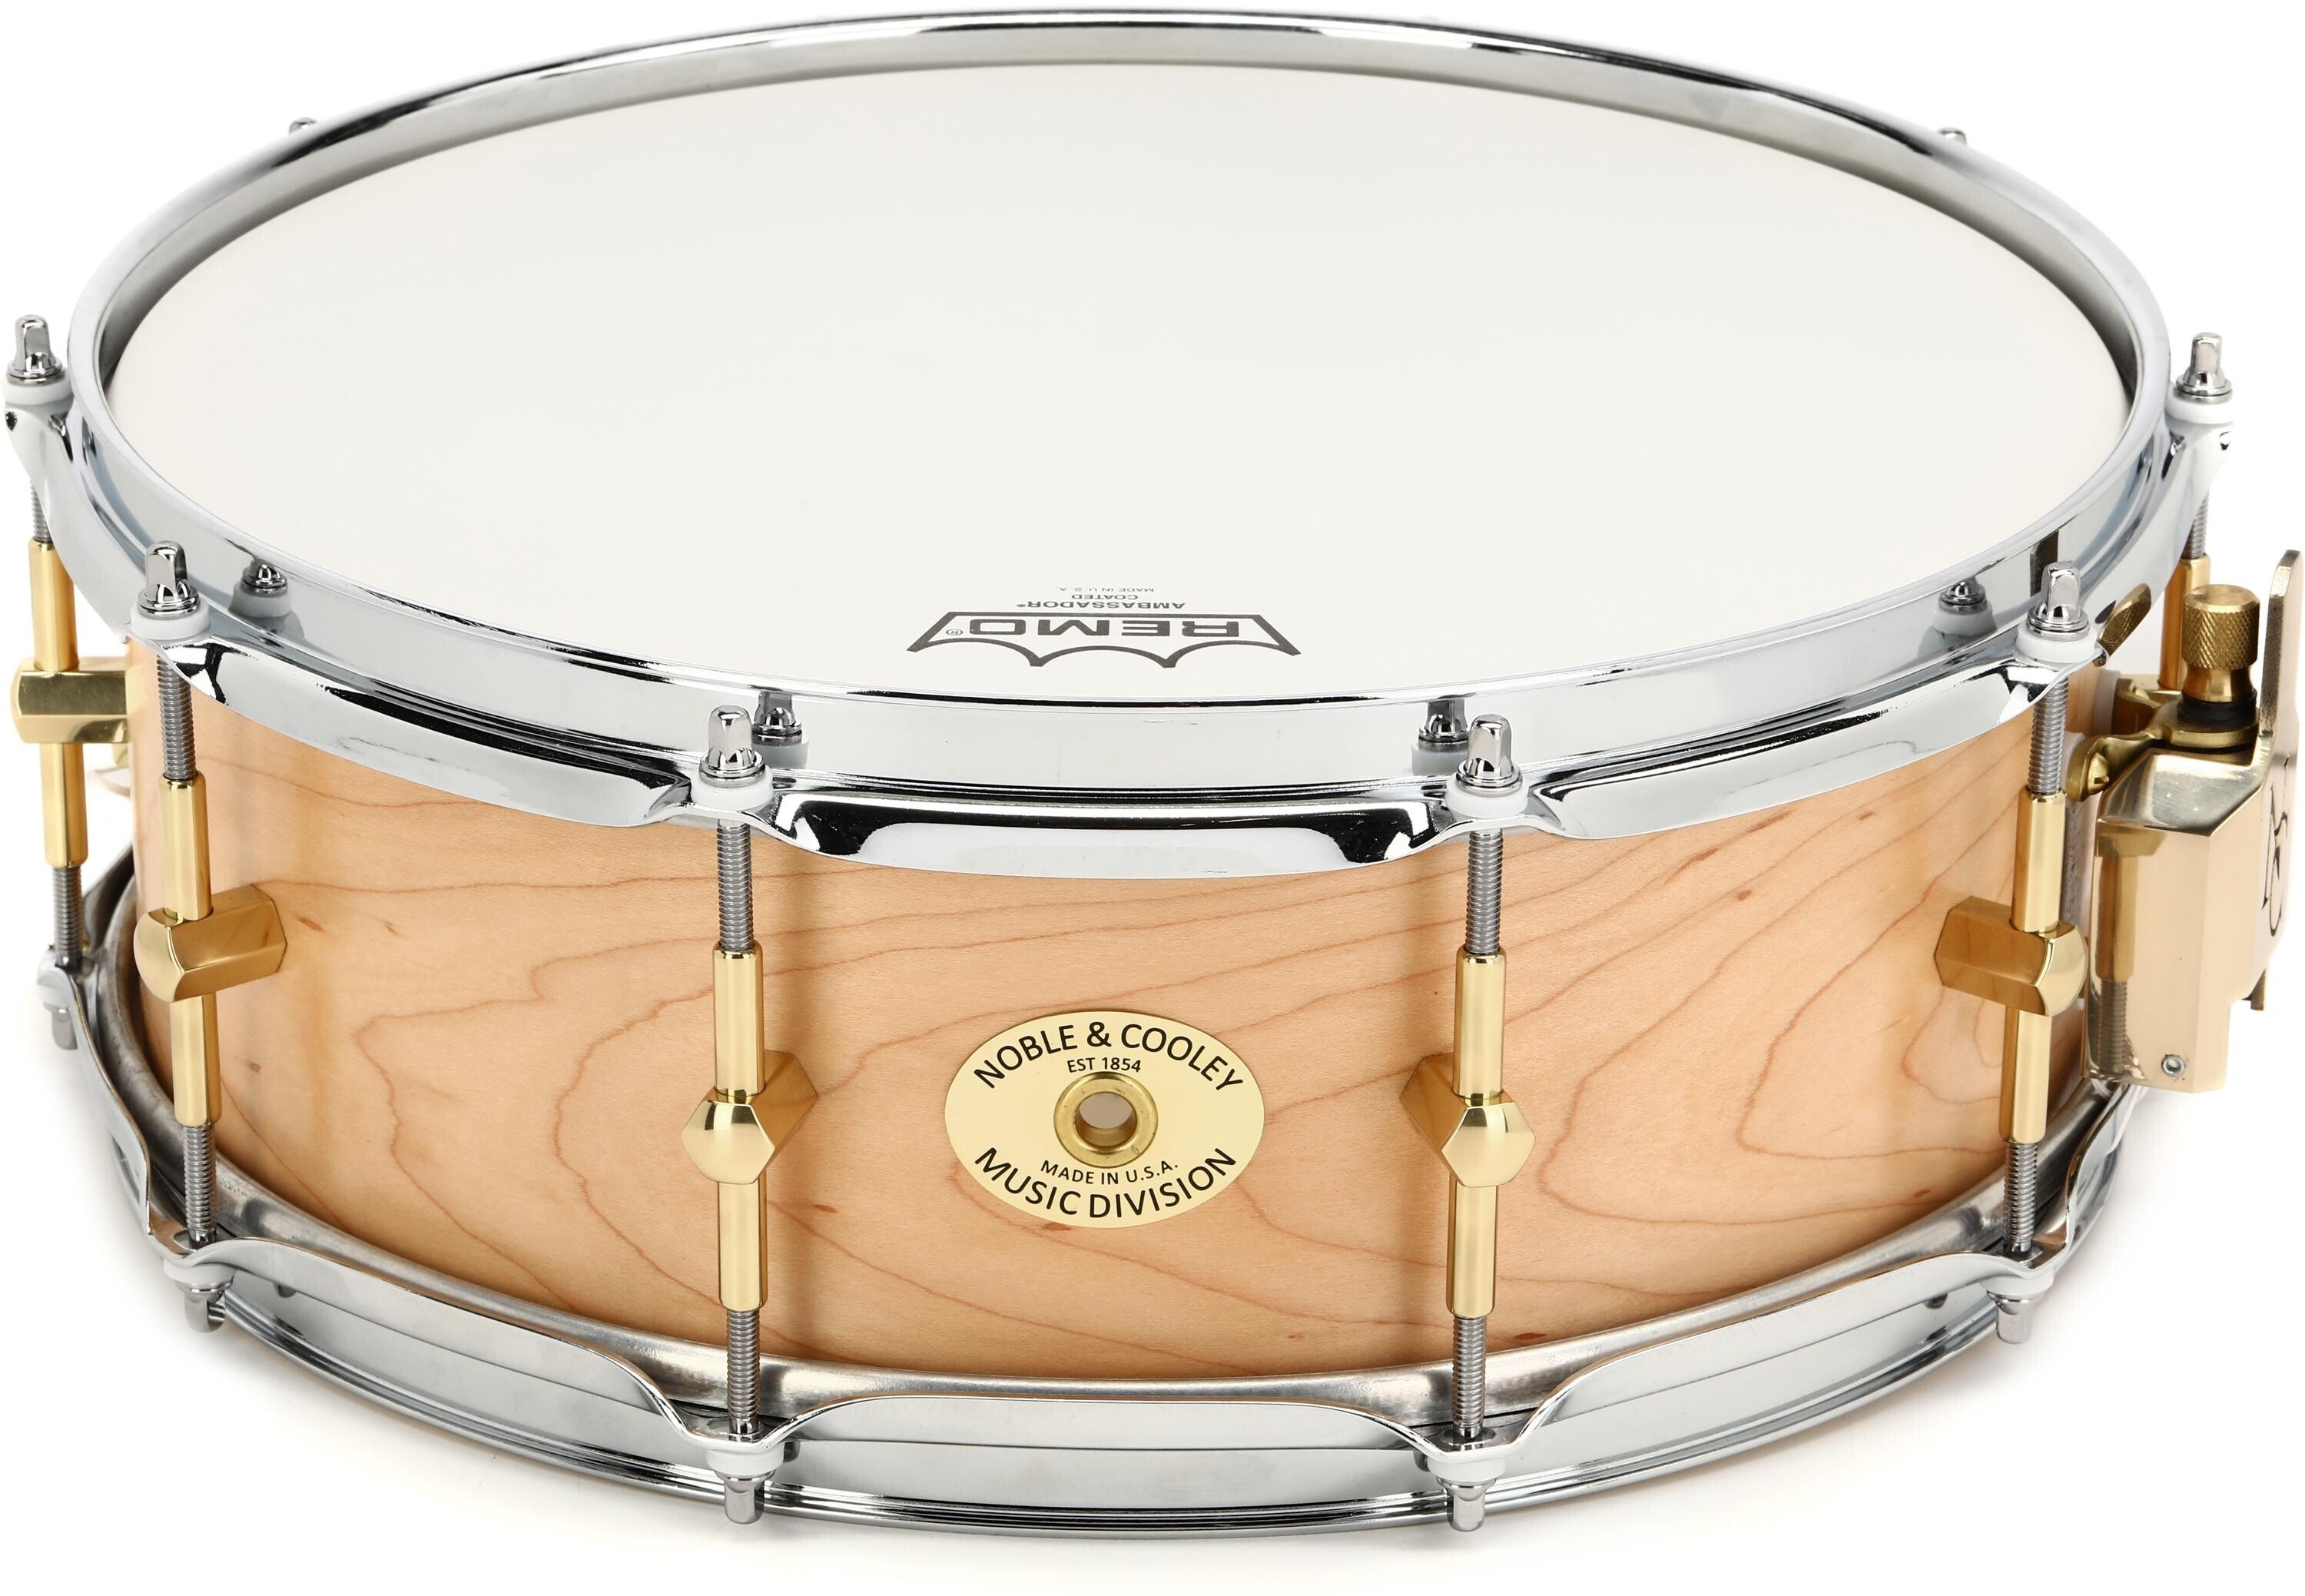 Noble & Cooley Solid Shell Maple Snare Drum - 5 x 14-inch - Natural Satin  with Brass Hardware